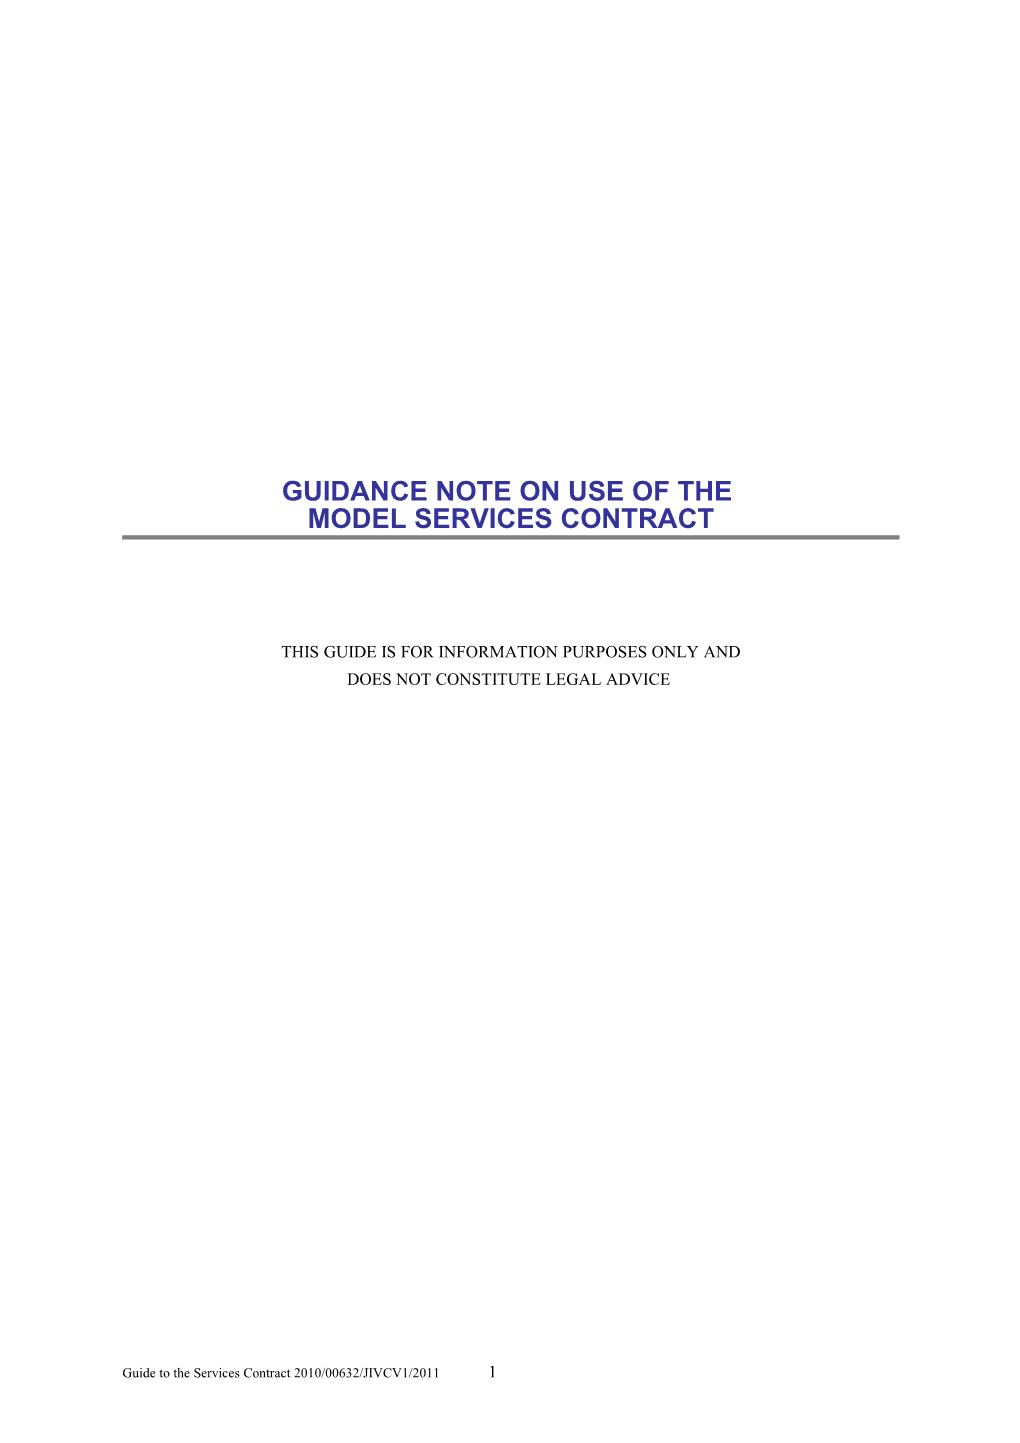 Guidance Note on Use of The